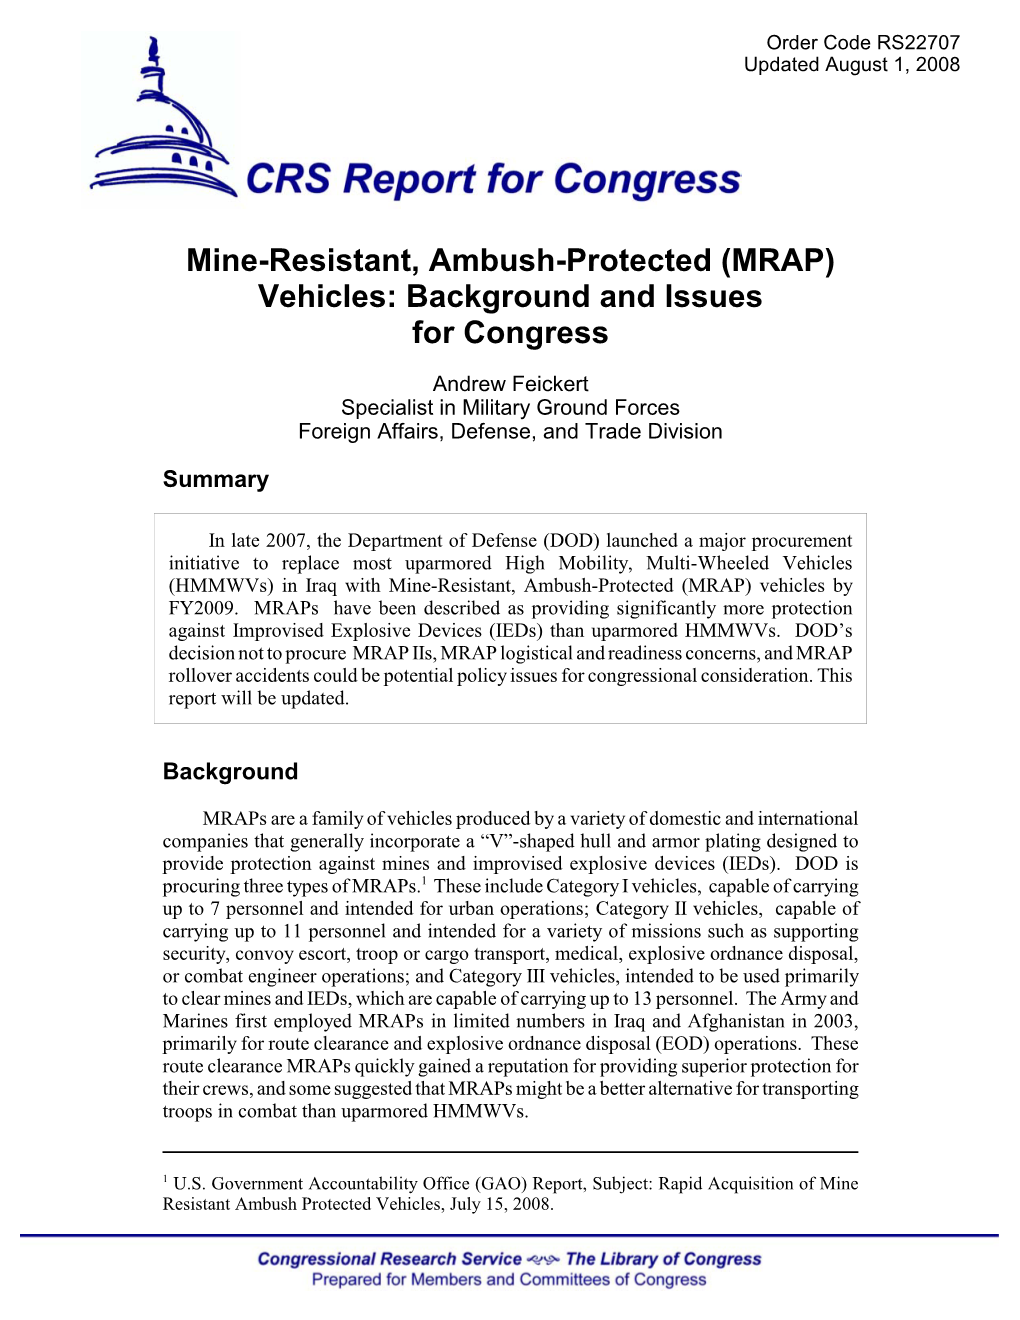 Mine-Resistant, Ambush-Protected (MRAP) Vehicles: Background and Issues for Congress